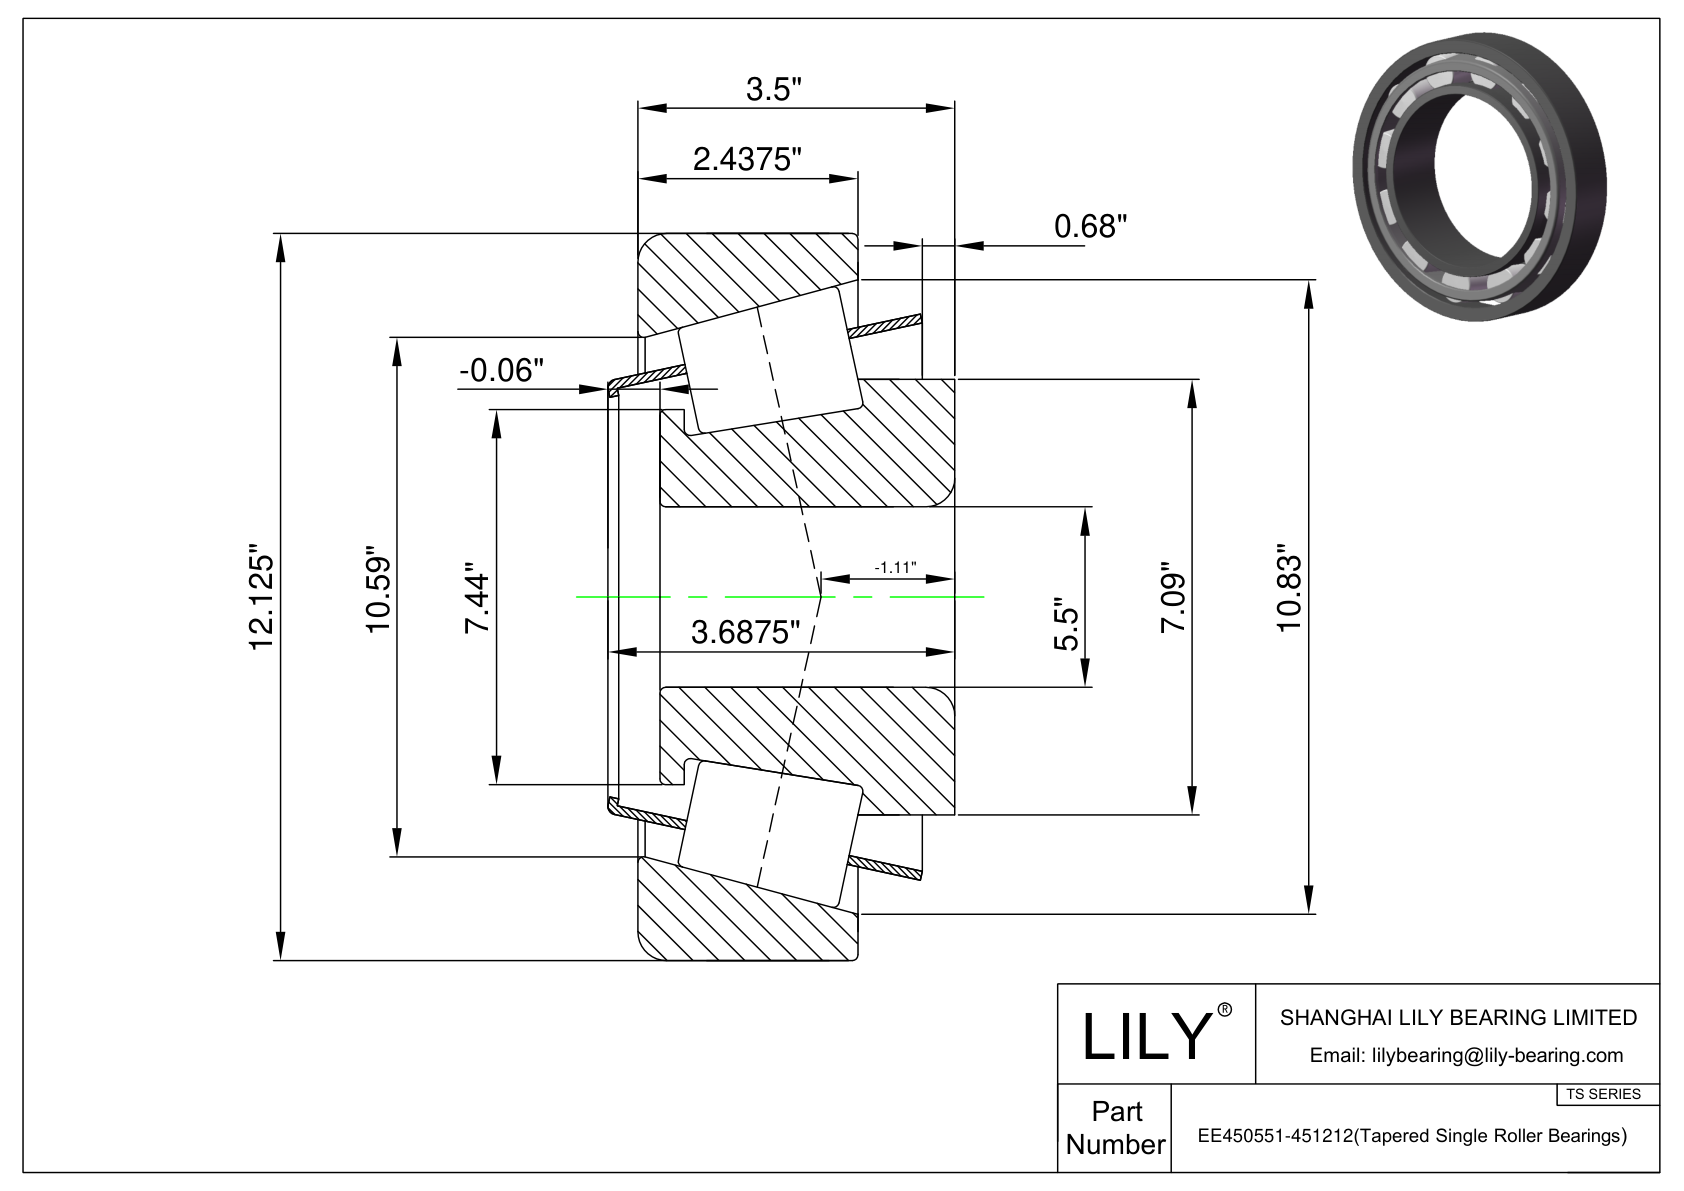 EE450551-451212 TS (Tapered Single Roller Bearings) (Imperial) cad drawing